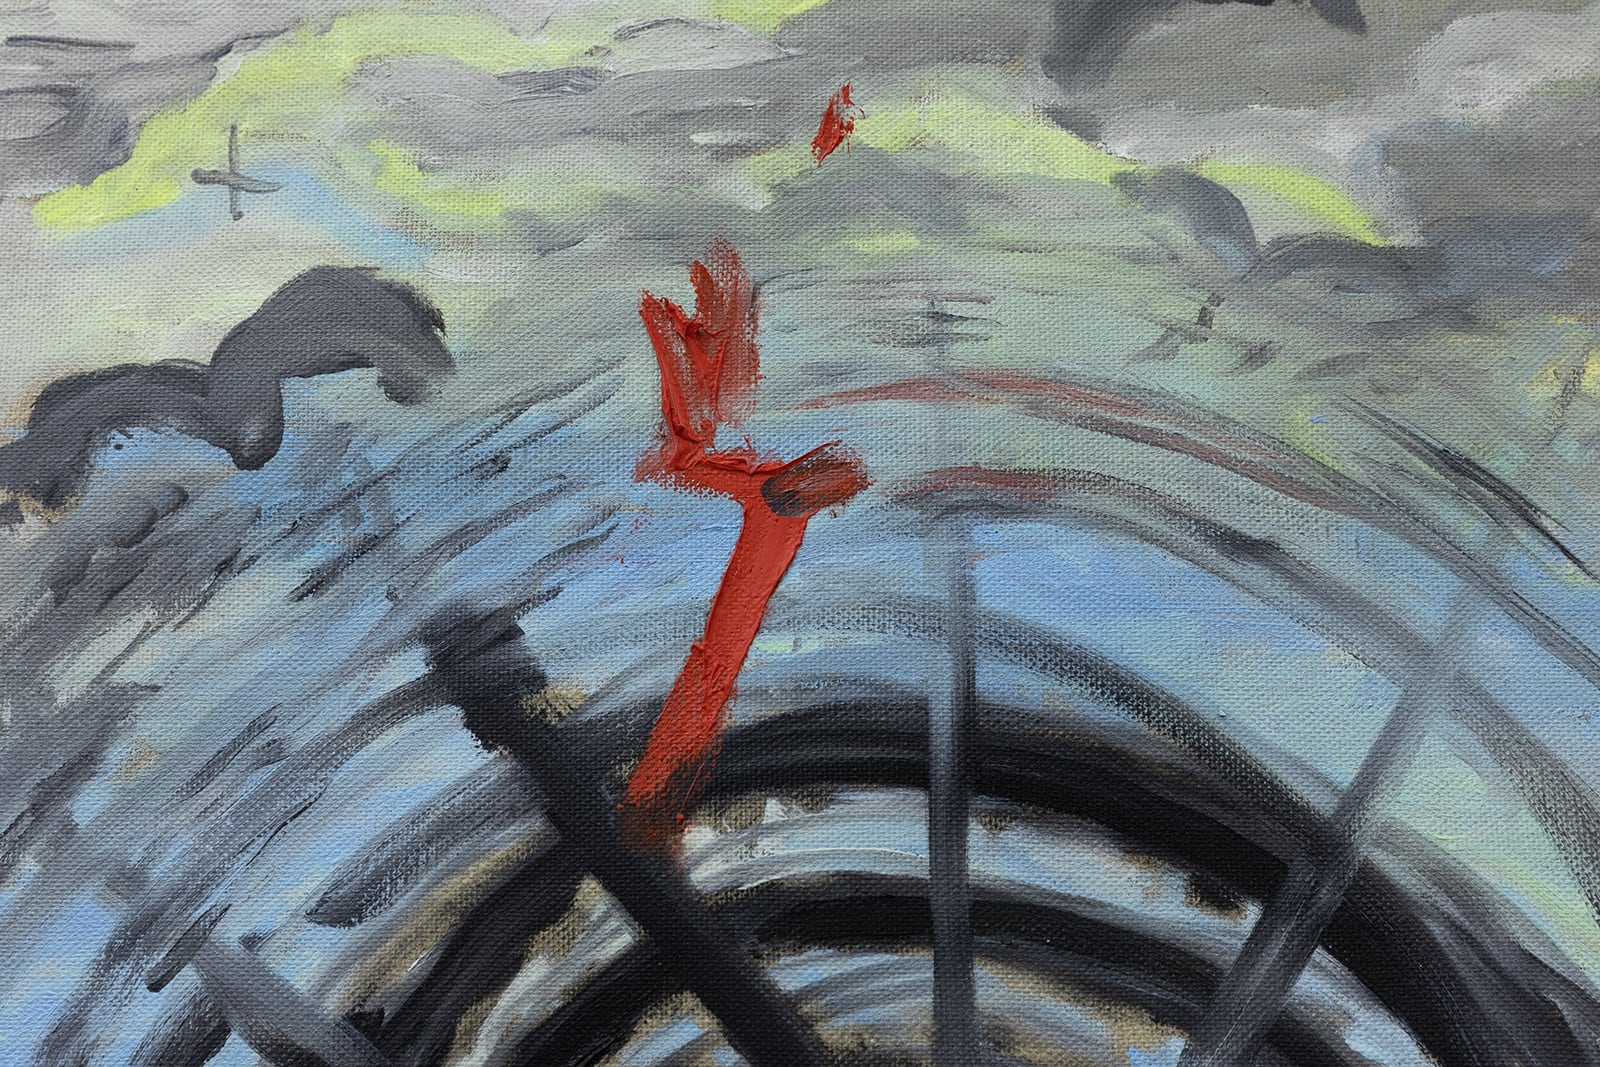 Mira Winding, Helicopter Death (Weed) (detail), 2021, oil on canvas 50 x 70 cm